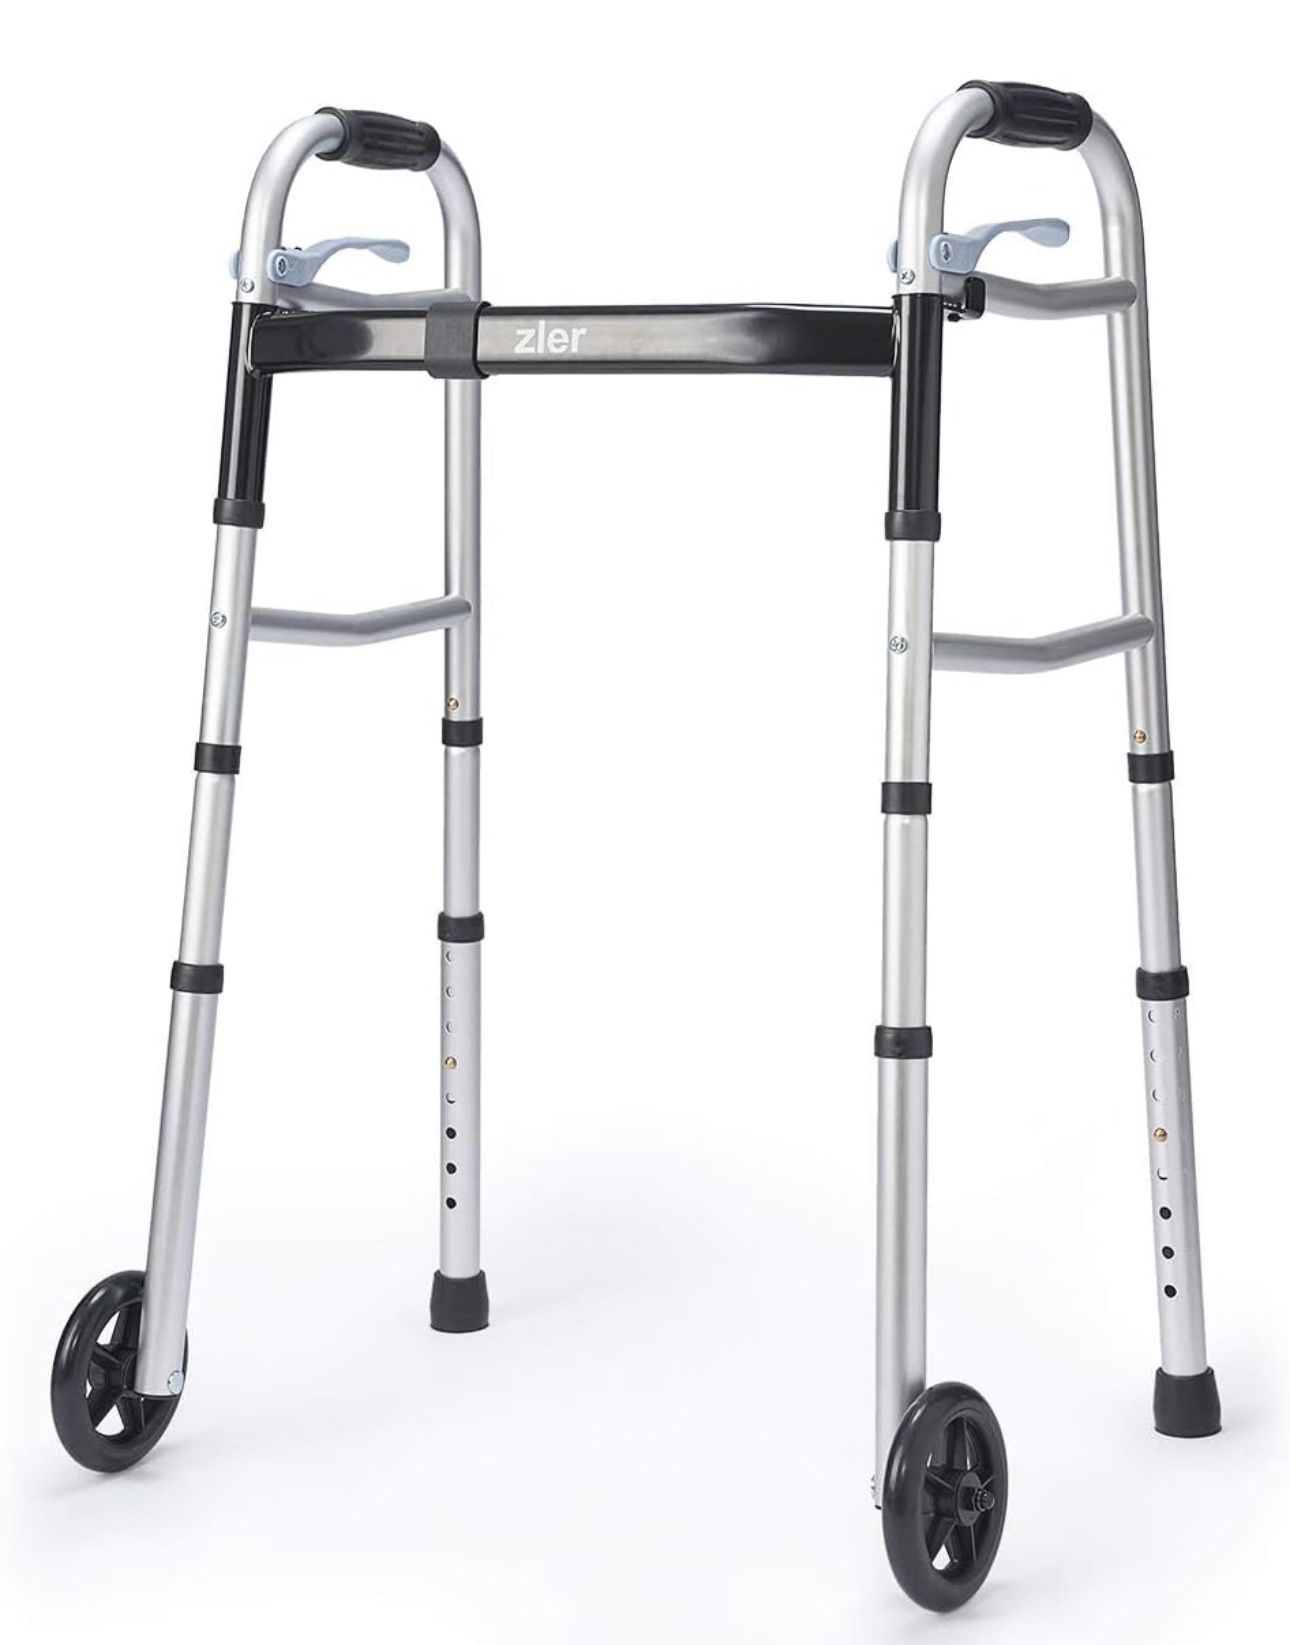 Zler Narrow Folding Walker for Seniors with Trigger Release and 5 Inches Wheels, Lightweight Supports up to 300 lb